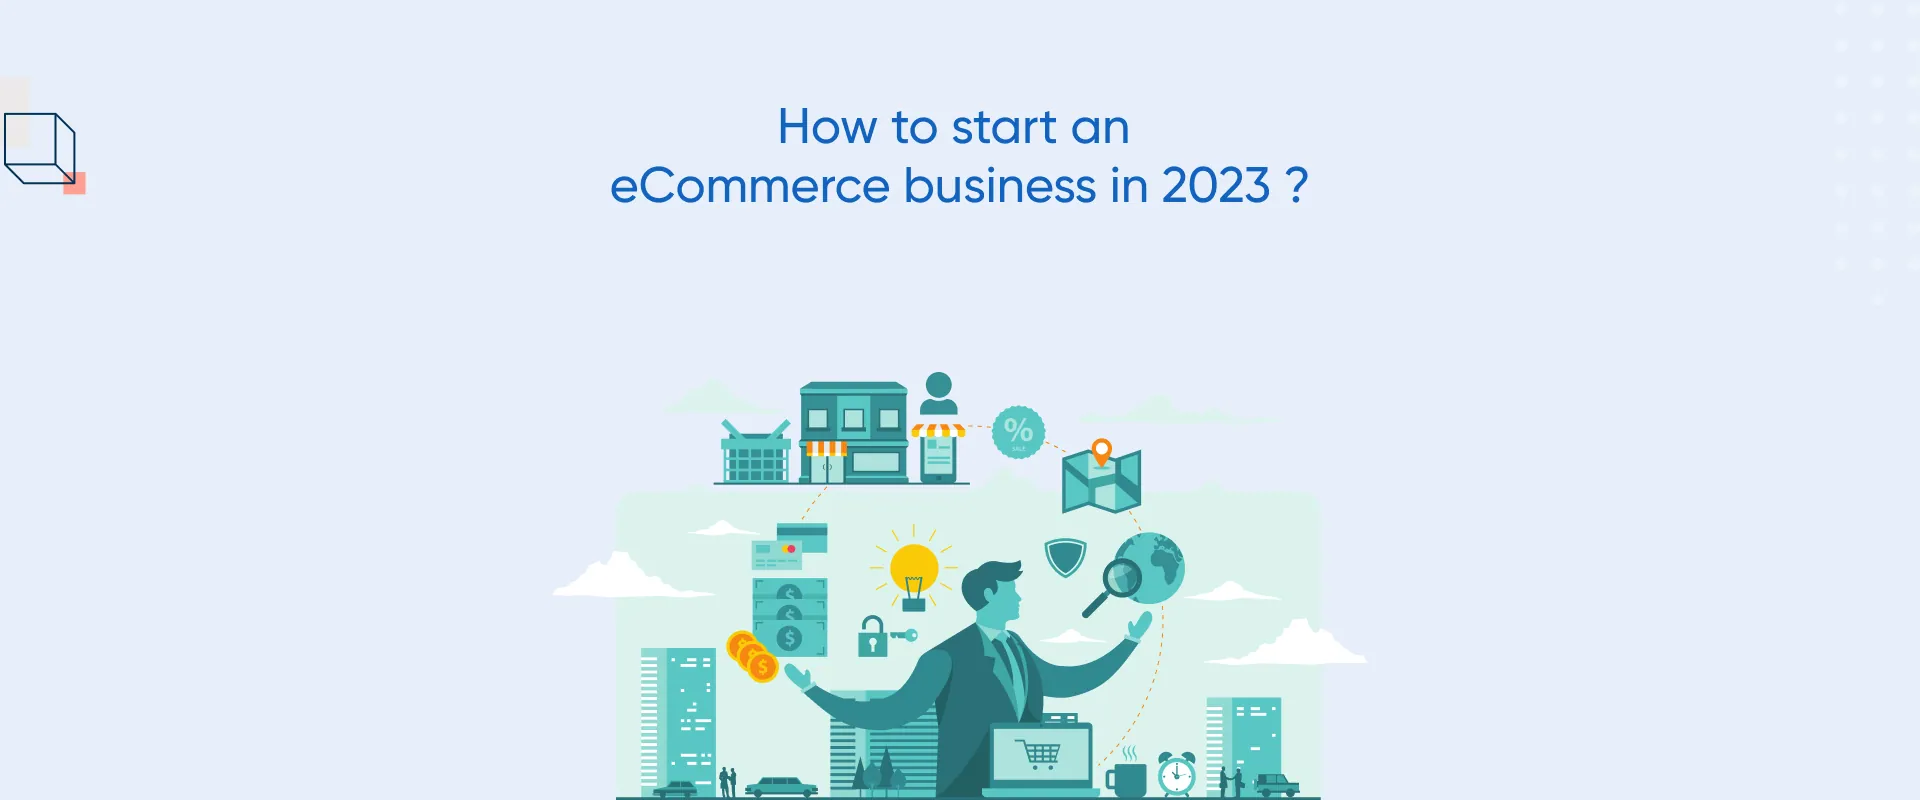 How to start an eCommerce business in 2023